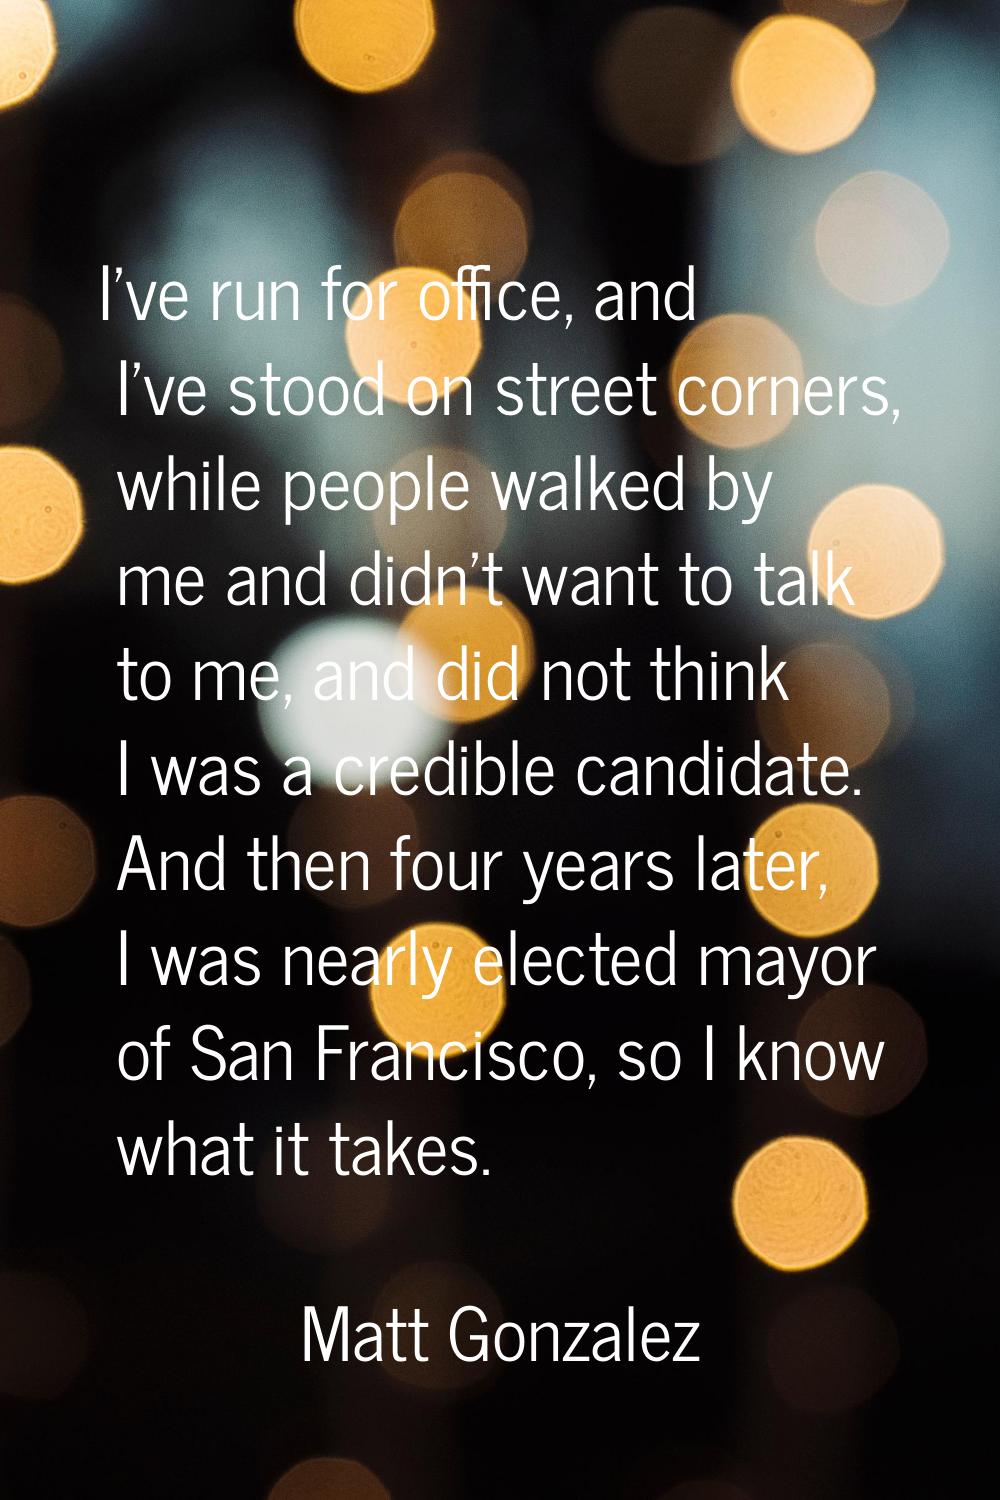 I've run for office, and I've stood on street corners, while people walked by me and didn't want to